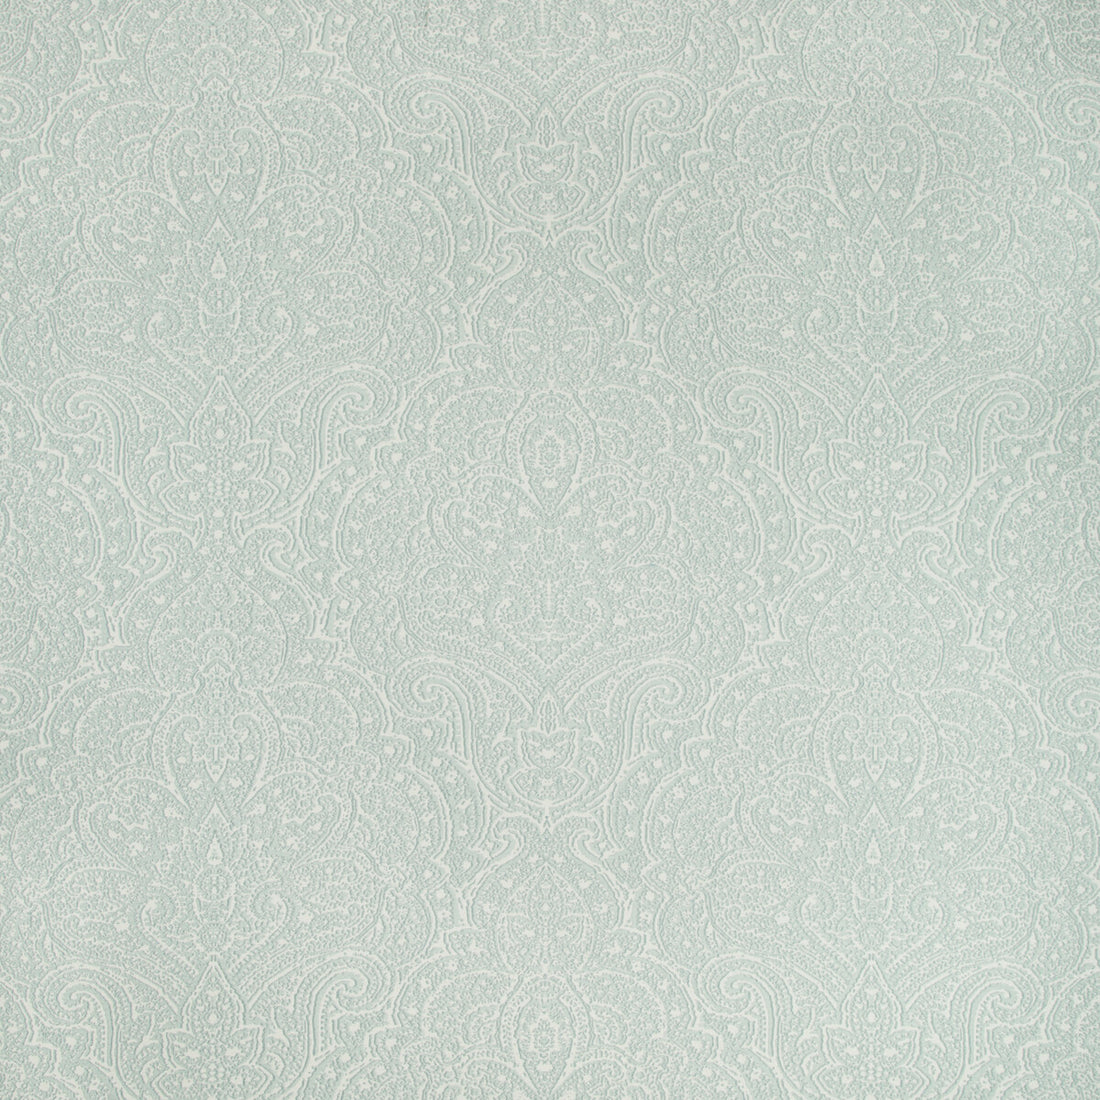 Yalding fabric in spa color - pattern 35300.115.0 - by Kravet Basics in the Greenwich collection